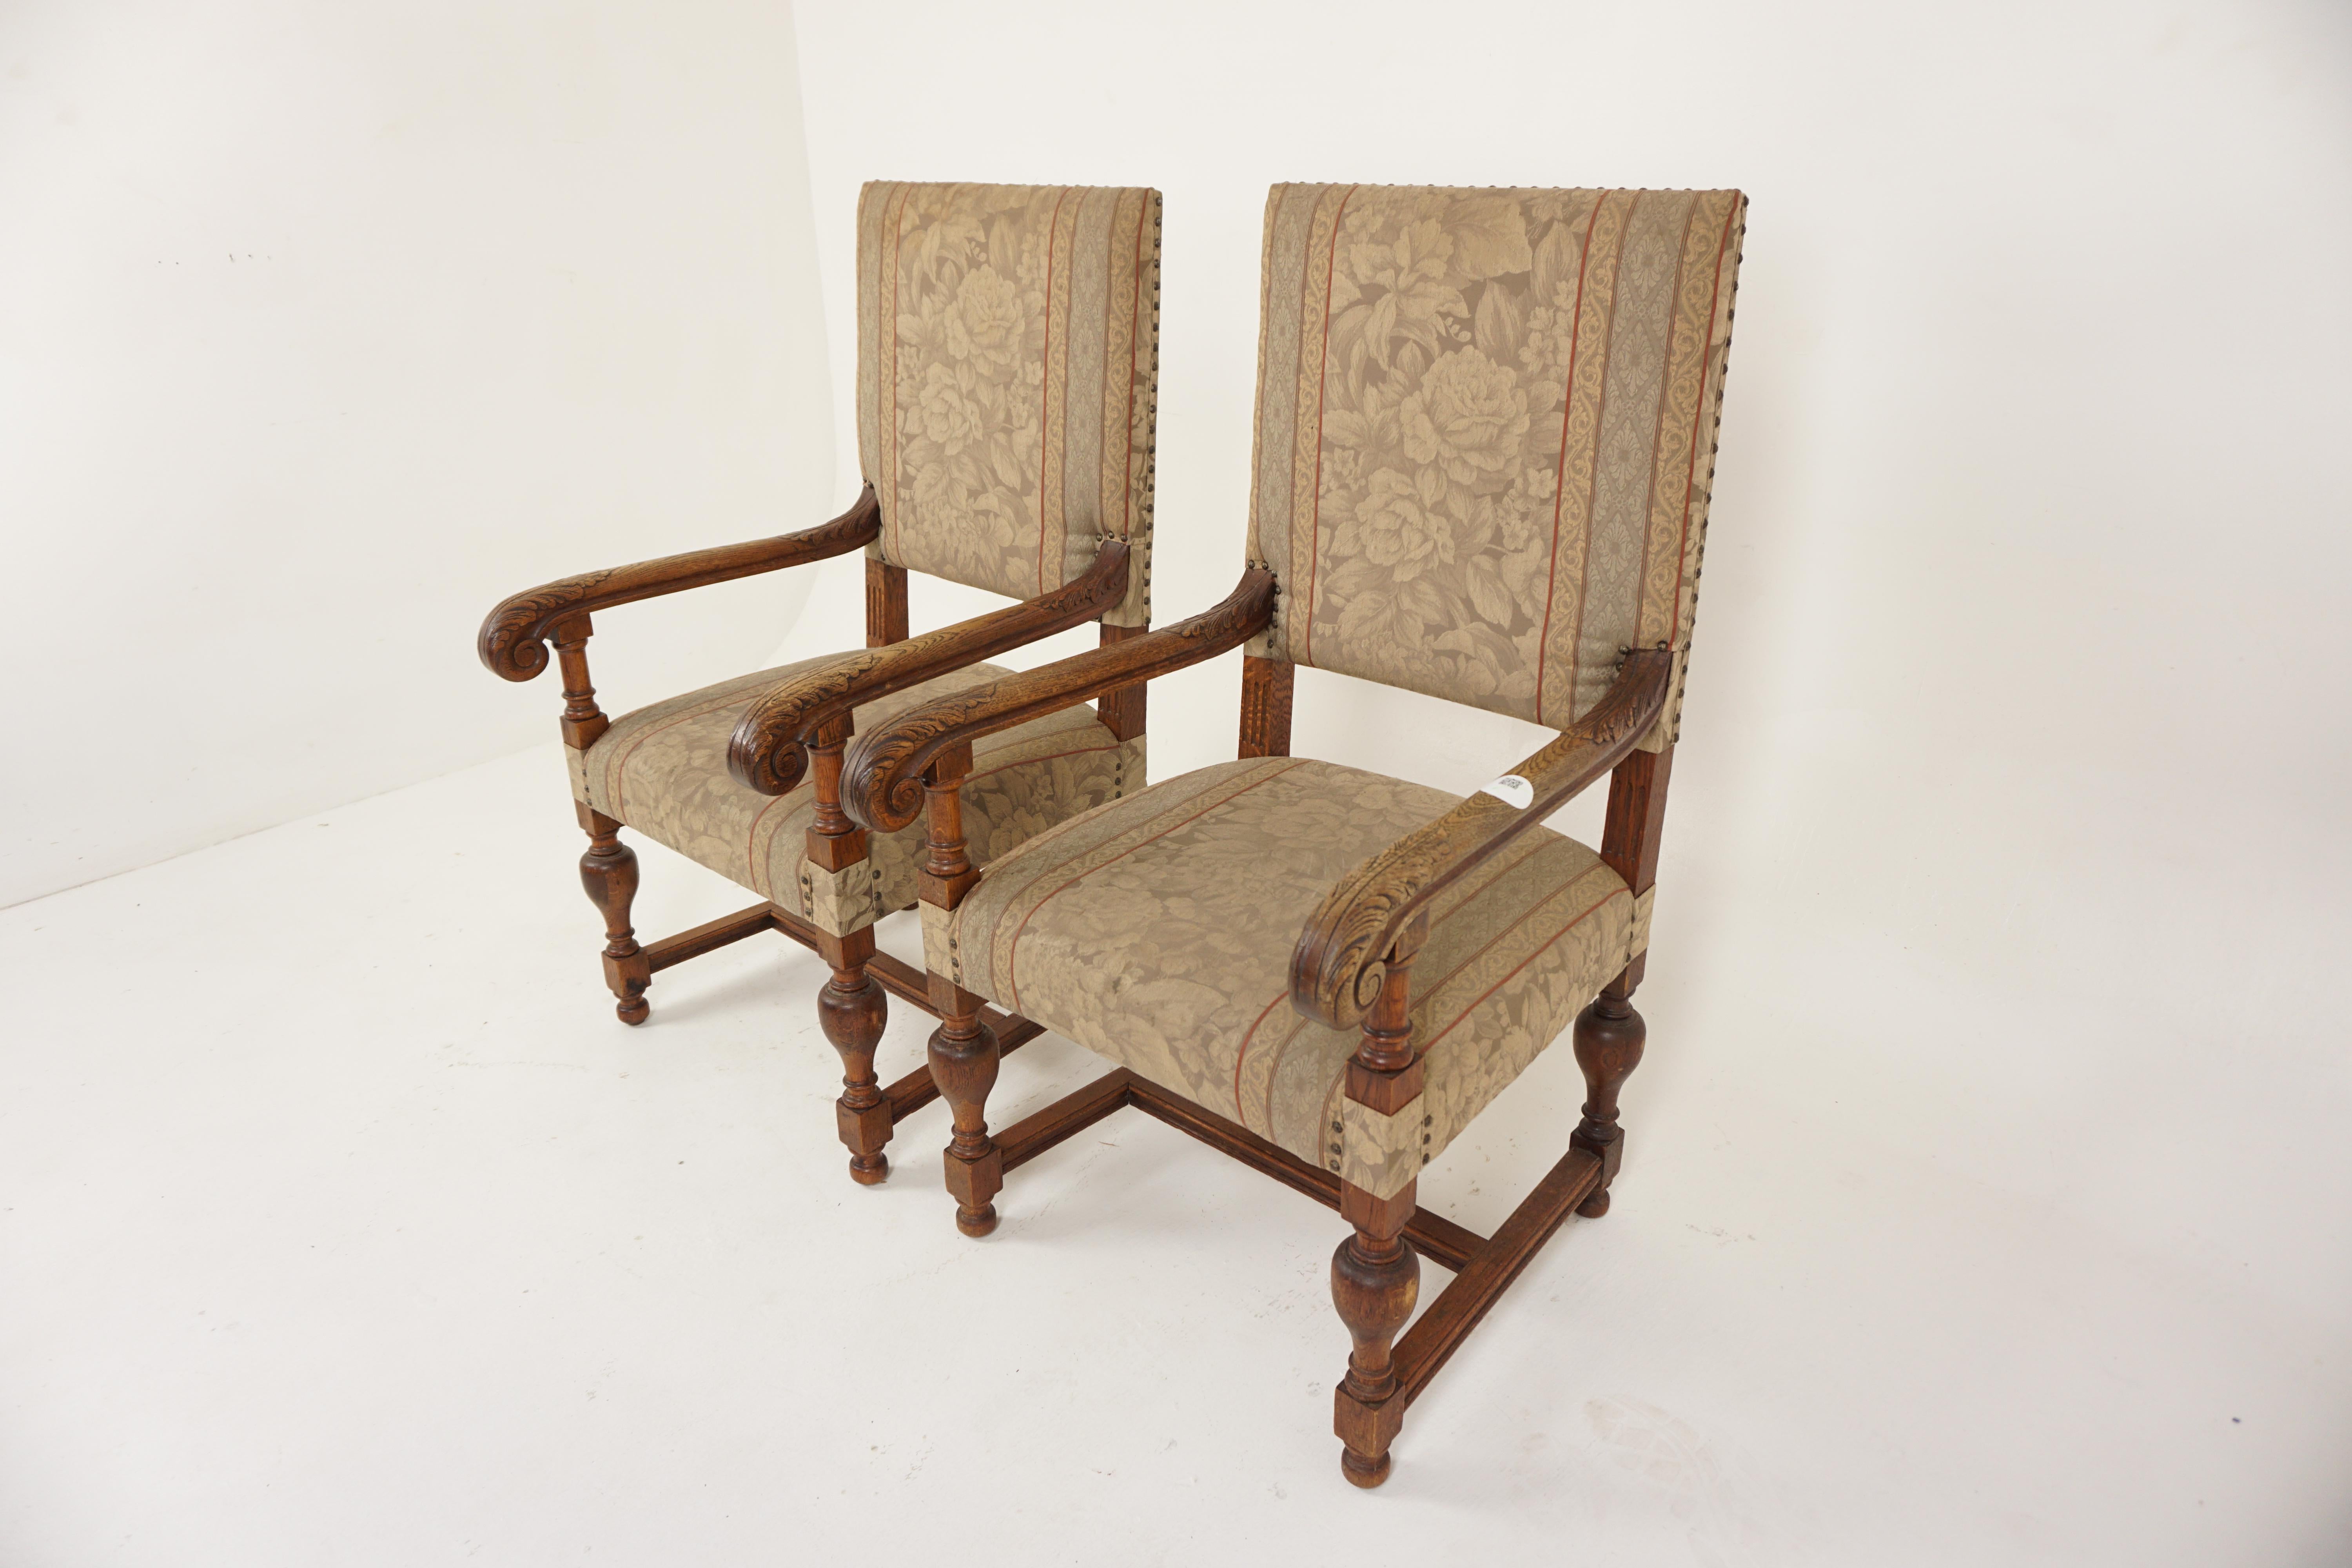 Pair of Carved Oak Baroque Throne chairs, Hall chairs, Library chair, Scotland 1910, H678

Scotland 1910
Solid Oak
Original Finish
Tall upholstered high back
With shaped and carved scrolled arms
Upholstered seat with a cotton floral fabric
All